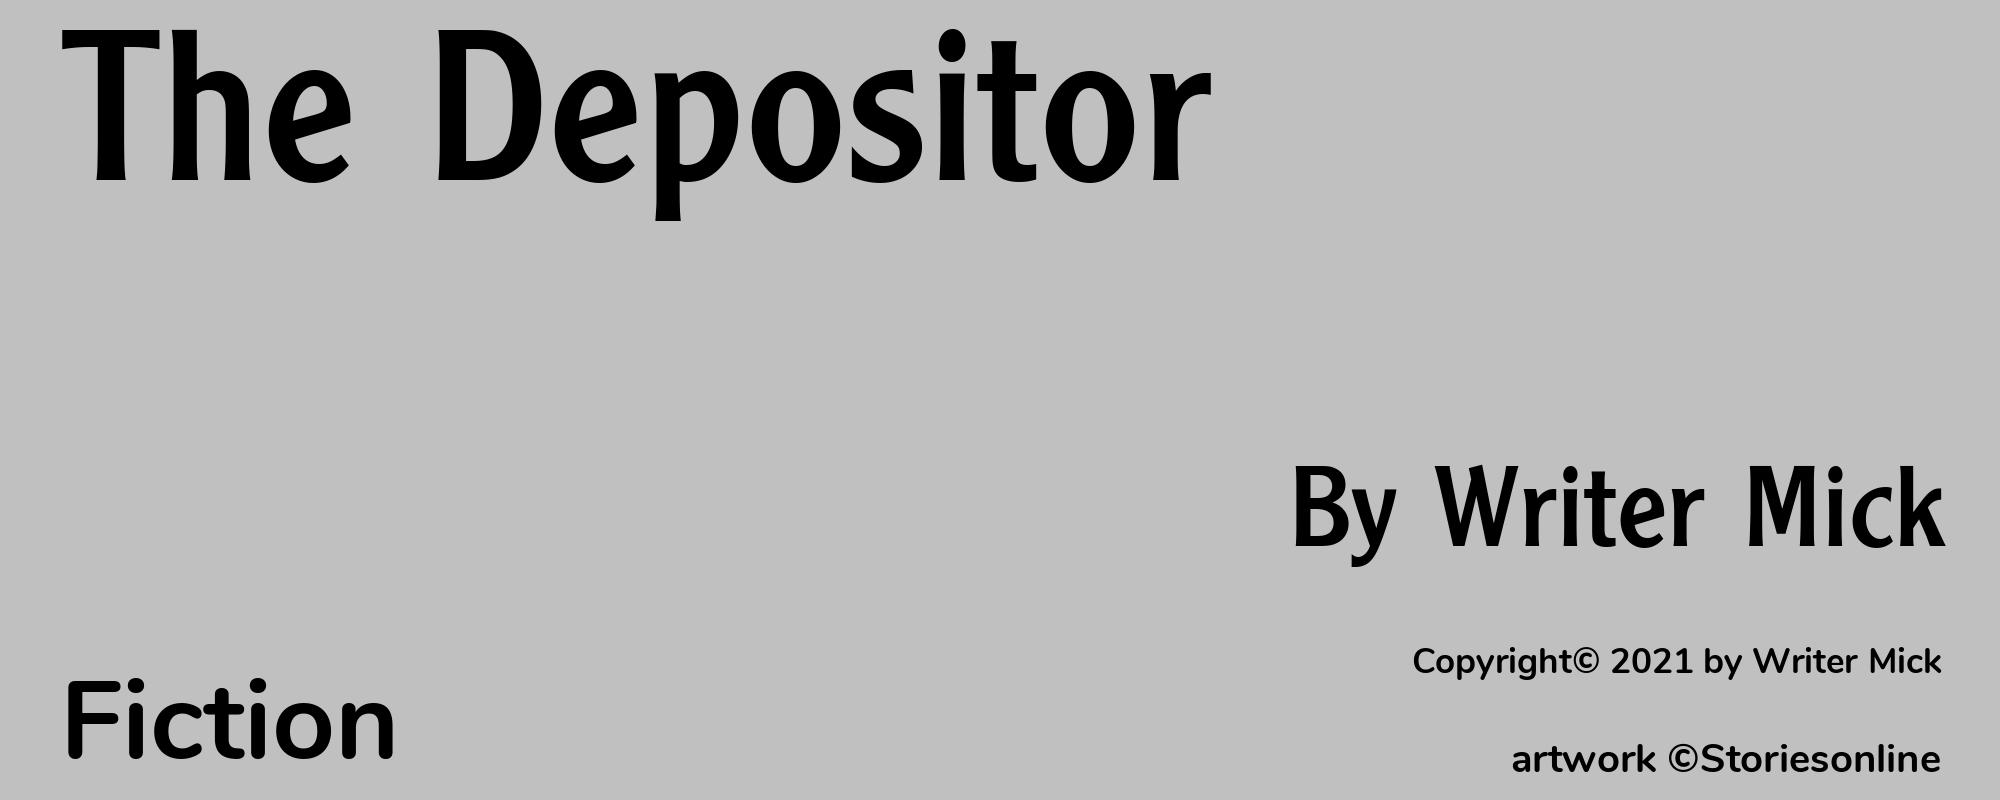 The Depositor - Cover